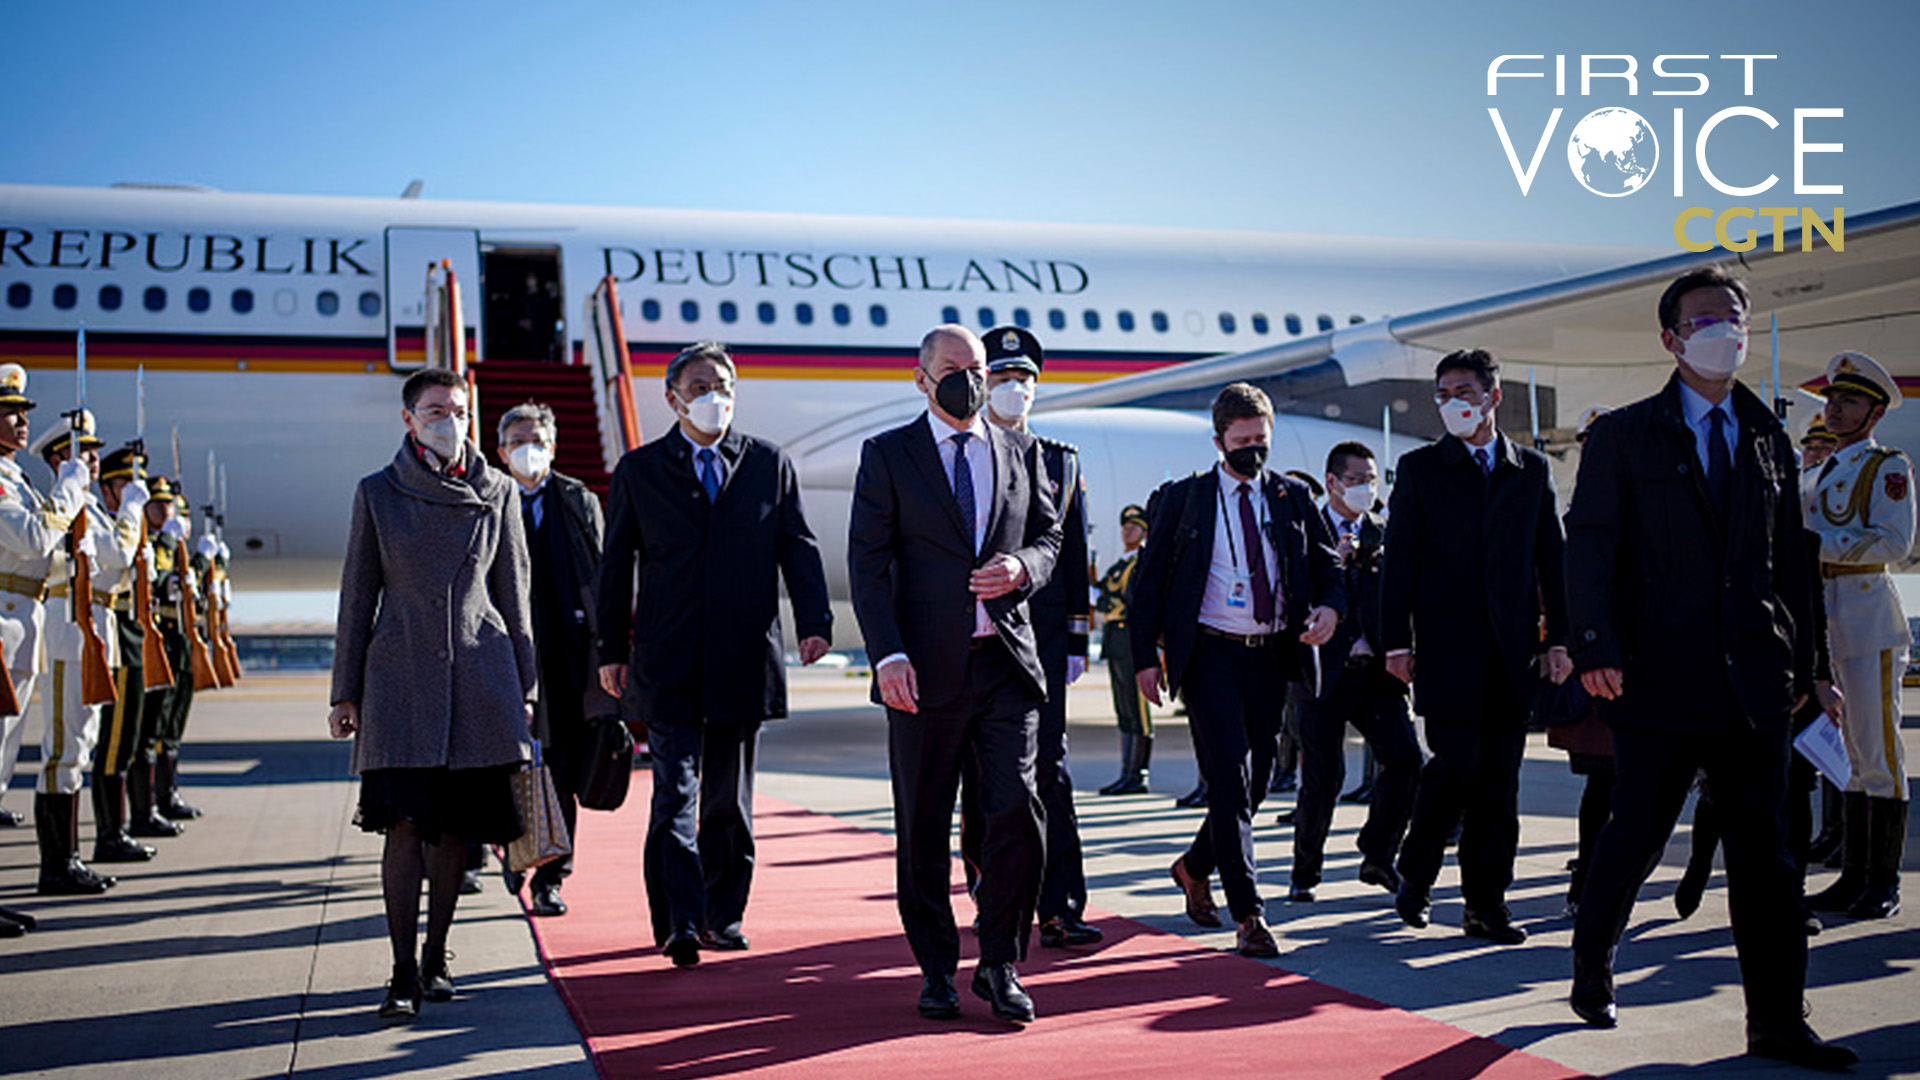 German Chancellor Olaf Scholz arrives at Beijing International Capital Airport on an Air Force Airbus A340 for his first visit as chancellor to Beijing, China, November 4, 2022. /CFP